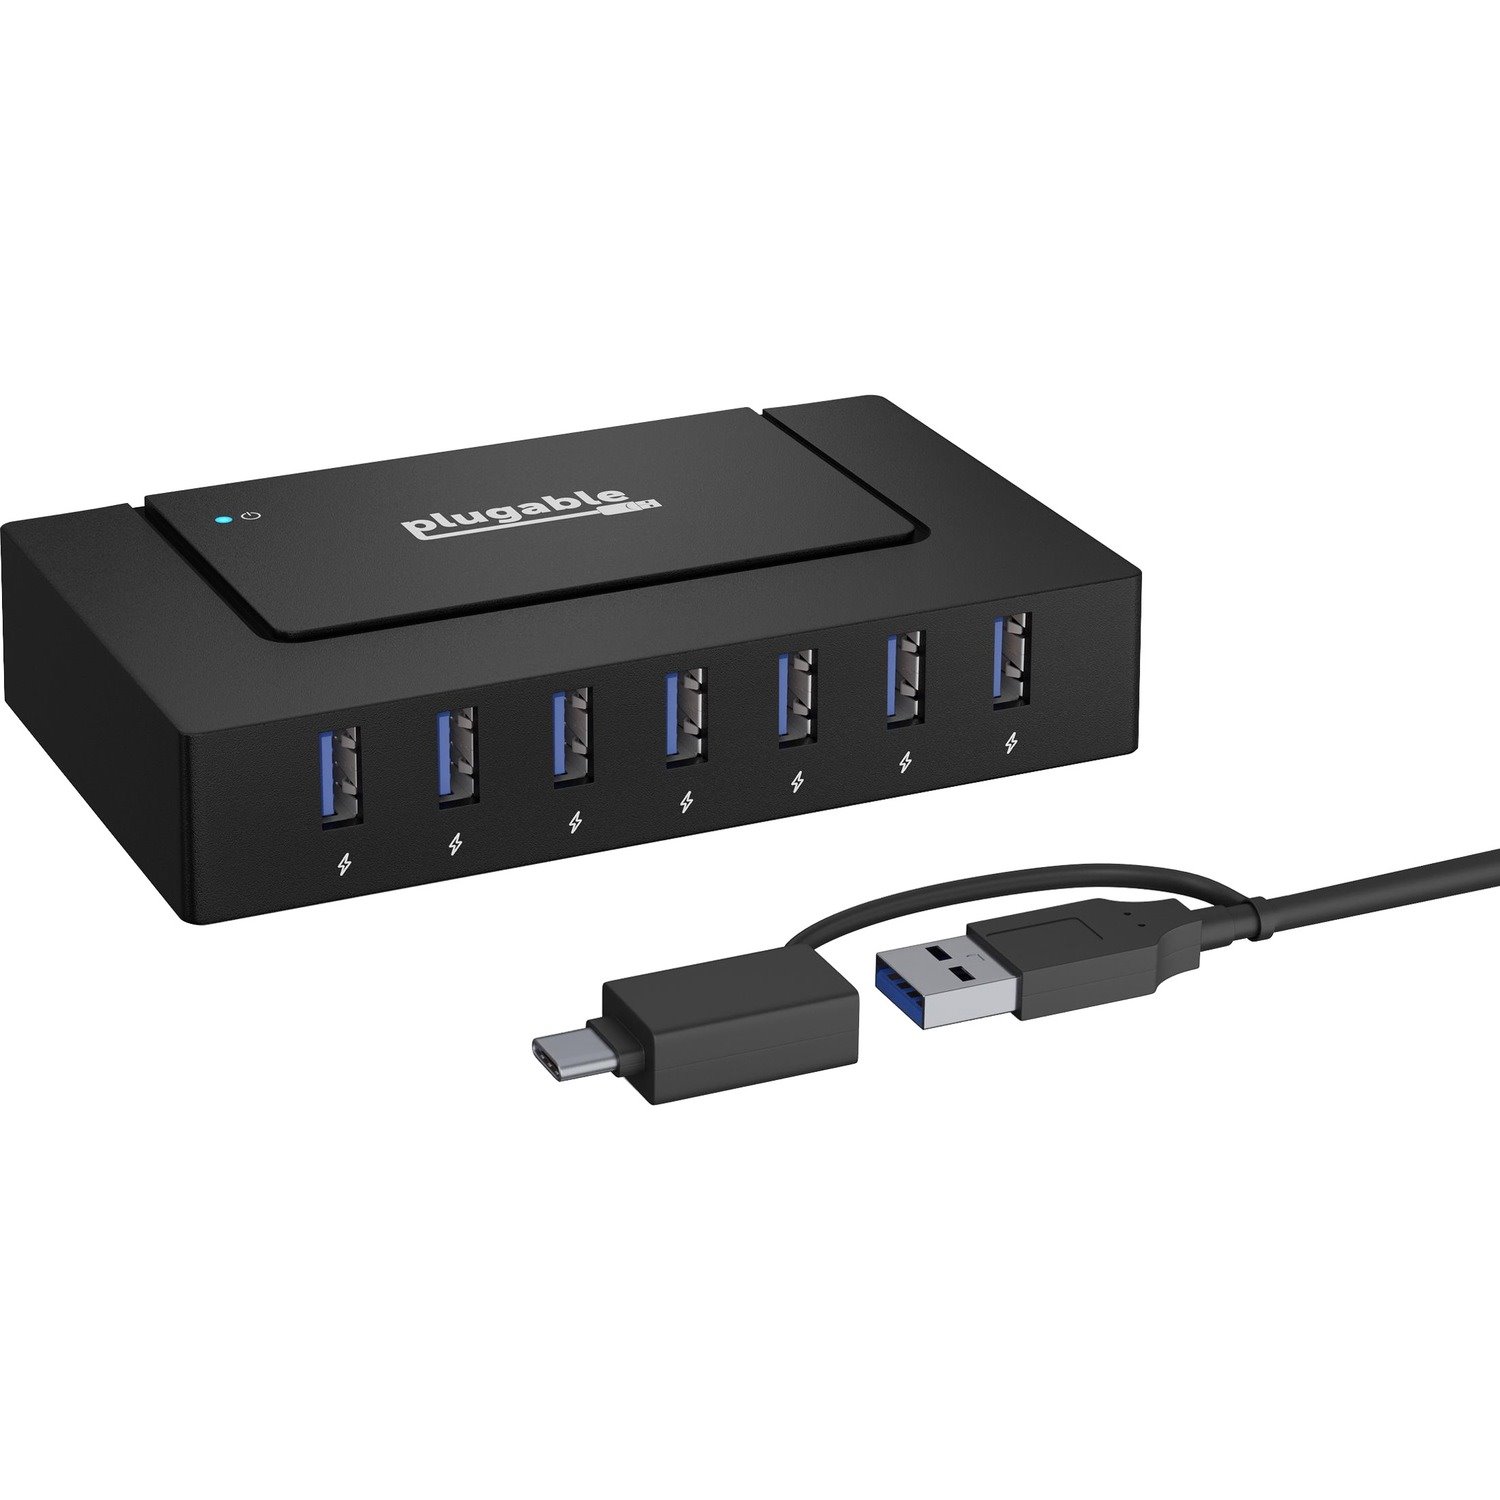 7 Port USB Charging Hub for Laptops with USB-C or USB 3.0